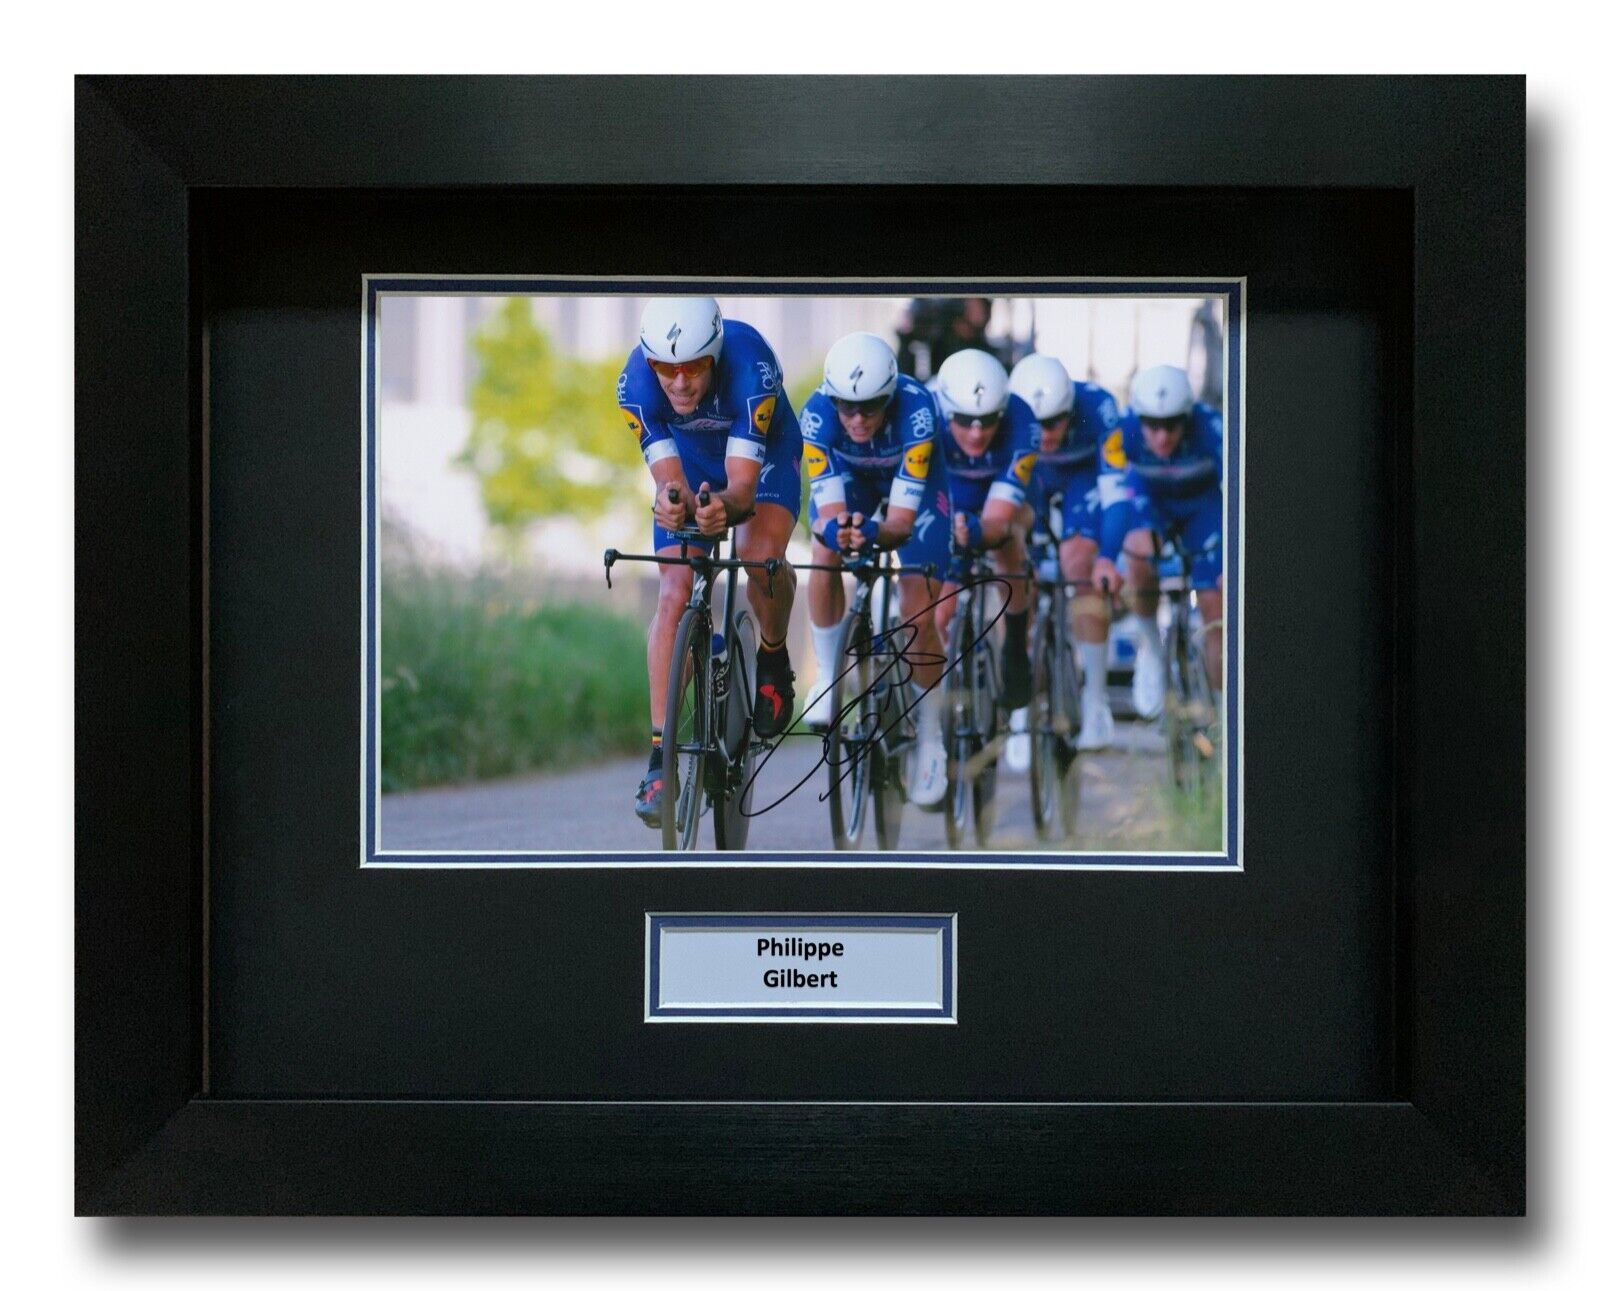 PHILIPPE GILBERT HAND SIGNED FRAMED Photo Poster painting DISPLAY TOUR DE FRANCE AUTOGRAPH 7